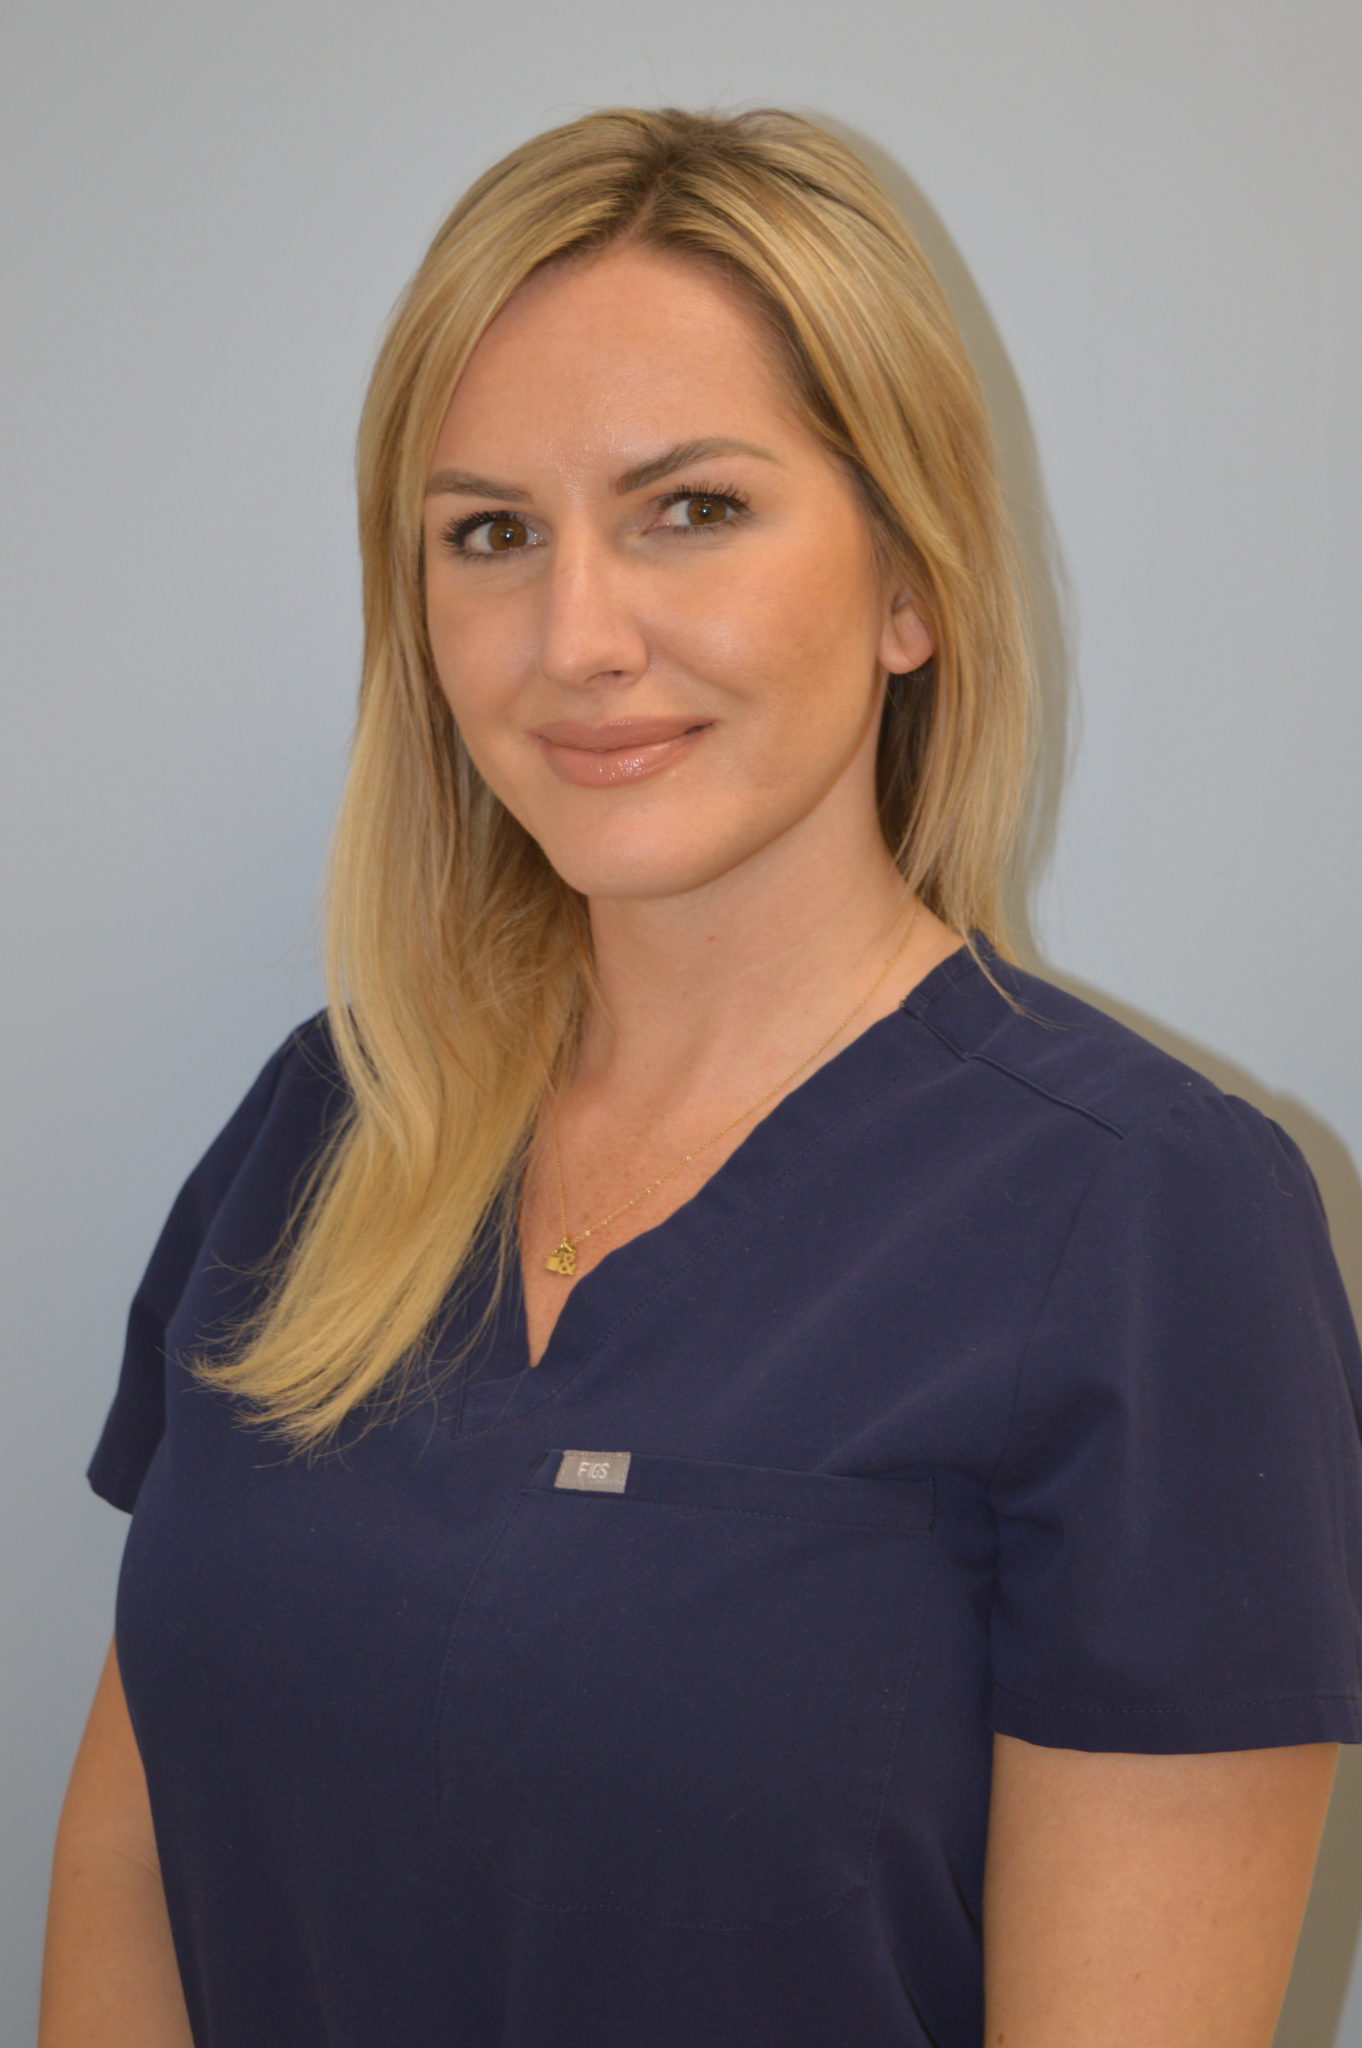 Dasha Panchenko - Registered Nurse specializing in facial and body aesthetics